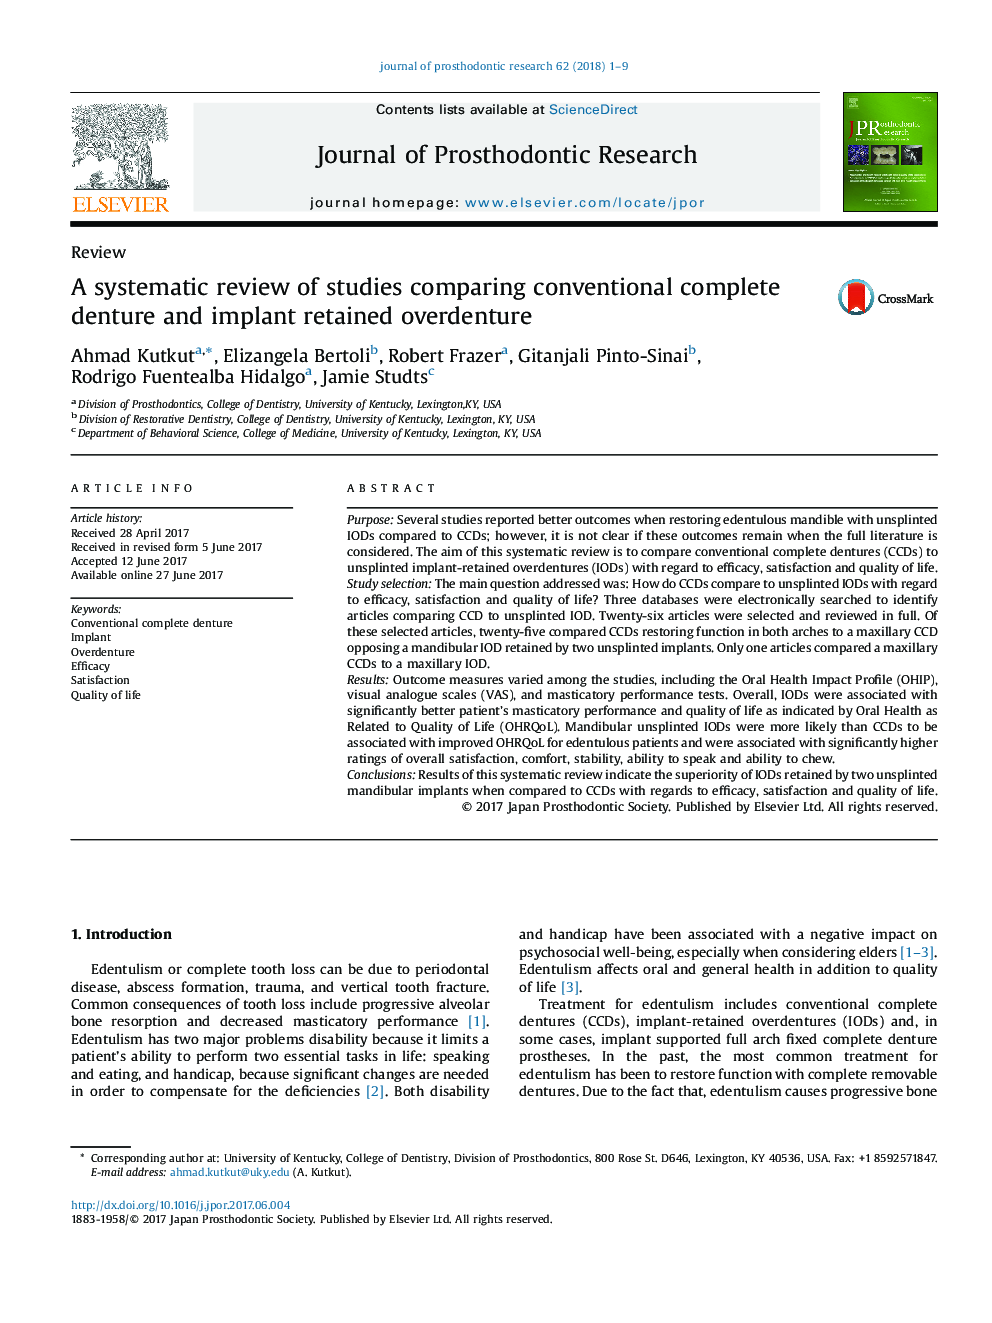 A systematic review of studies comparing conventional complete denture and implant retained overdenture